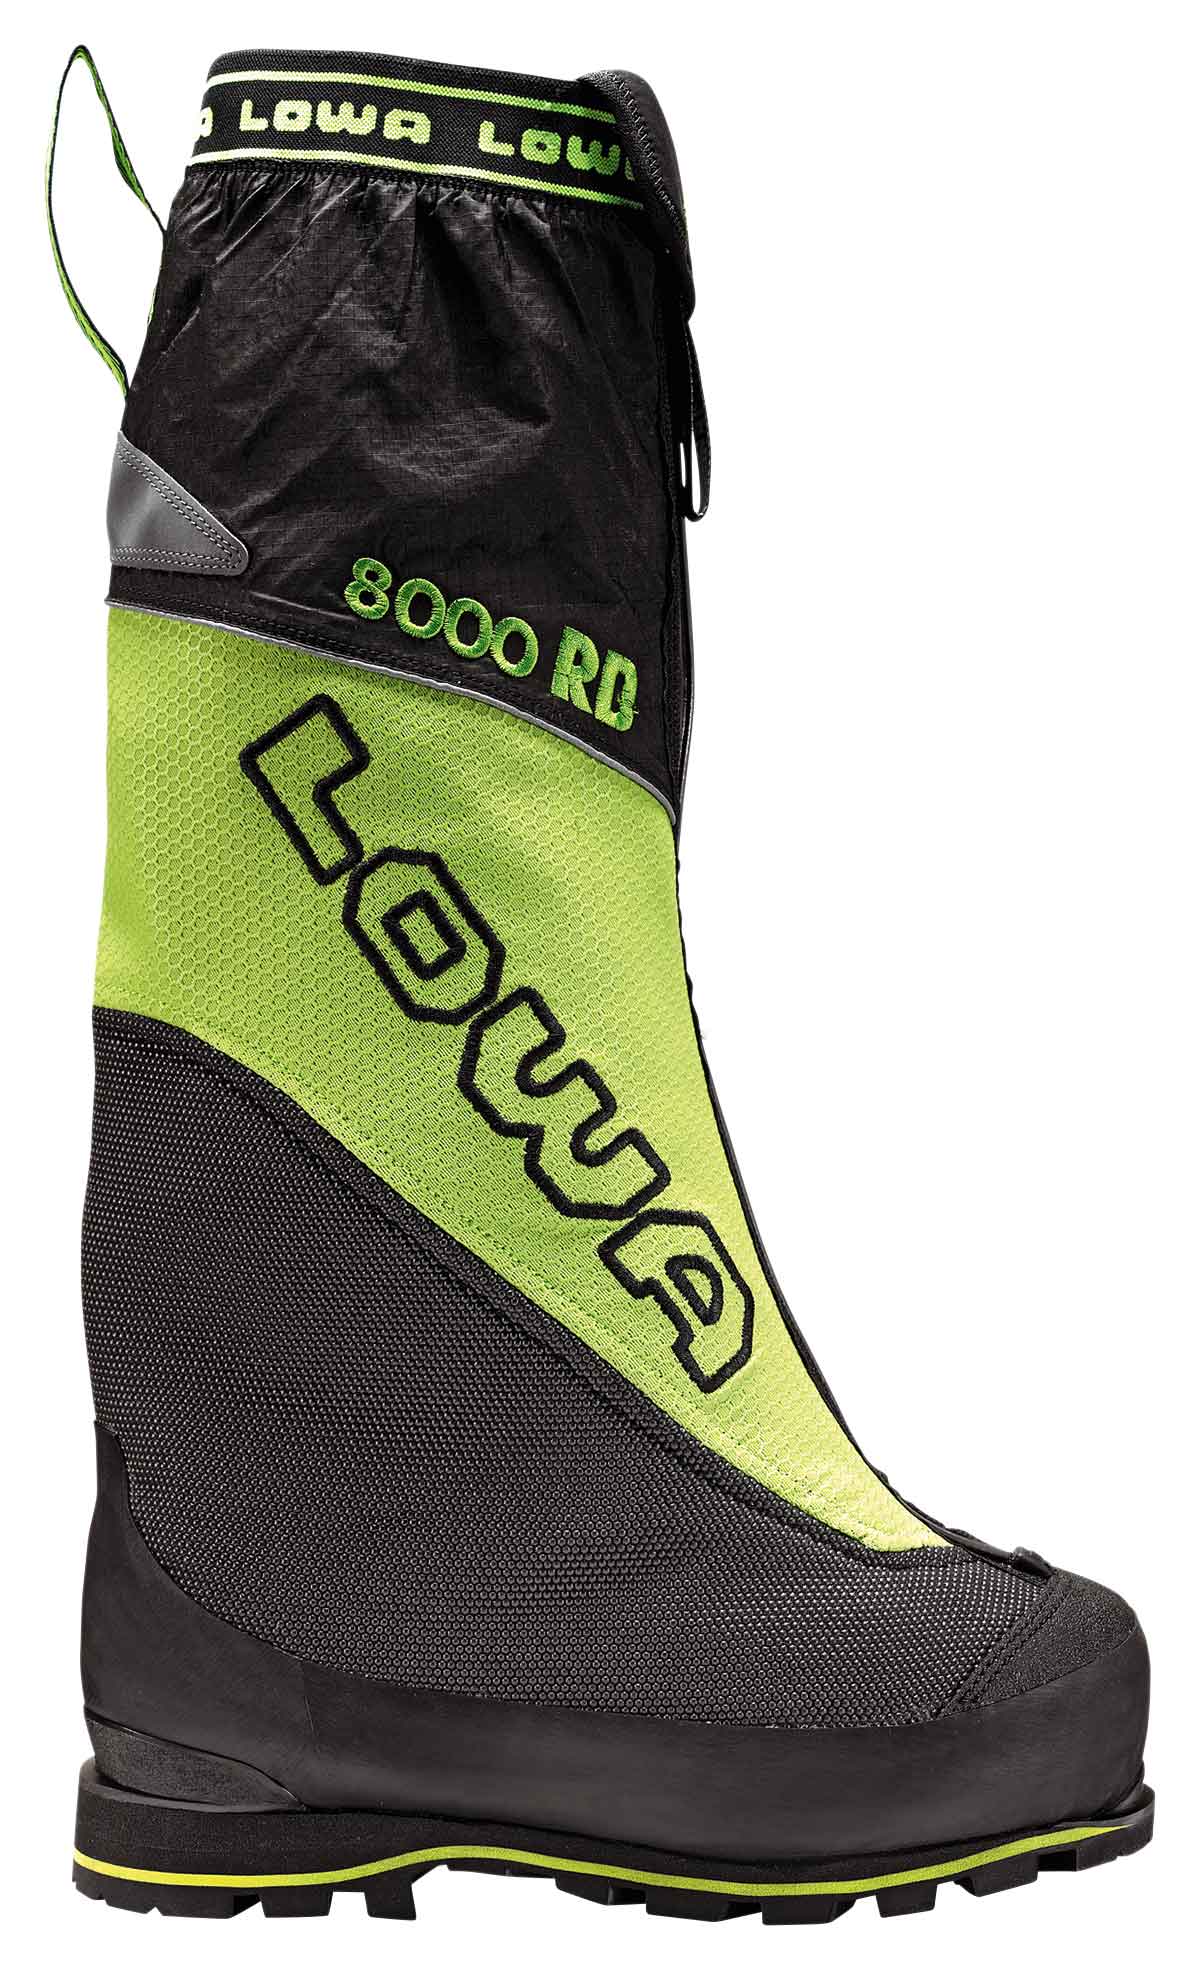 Lowa Expedition 8000 Evo RD - Mountaineering Boots